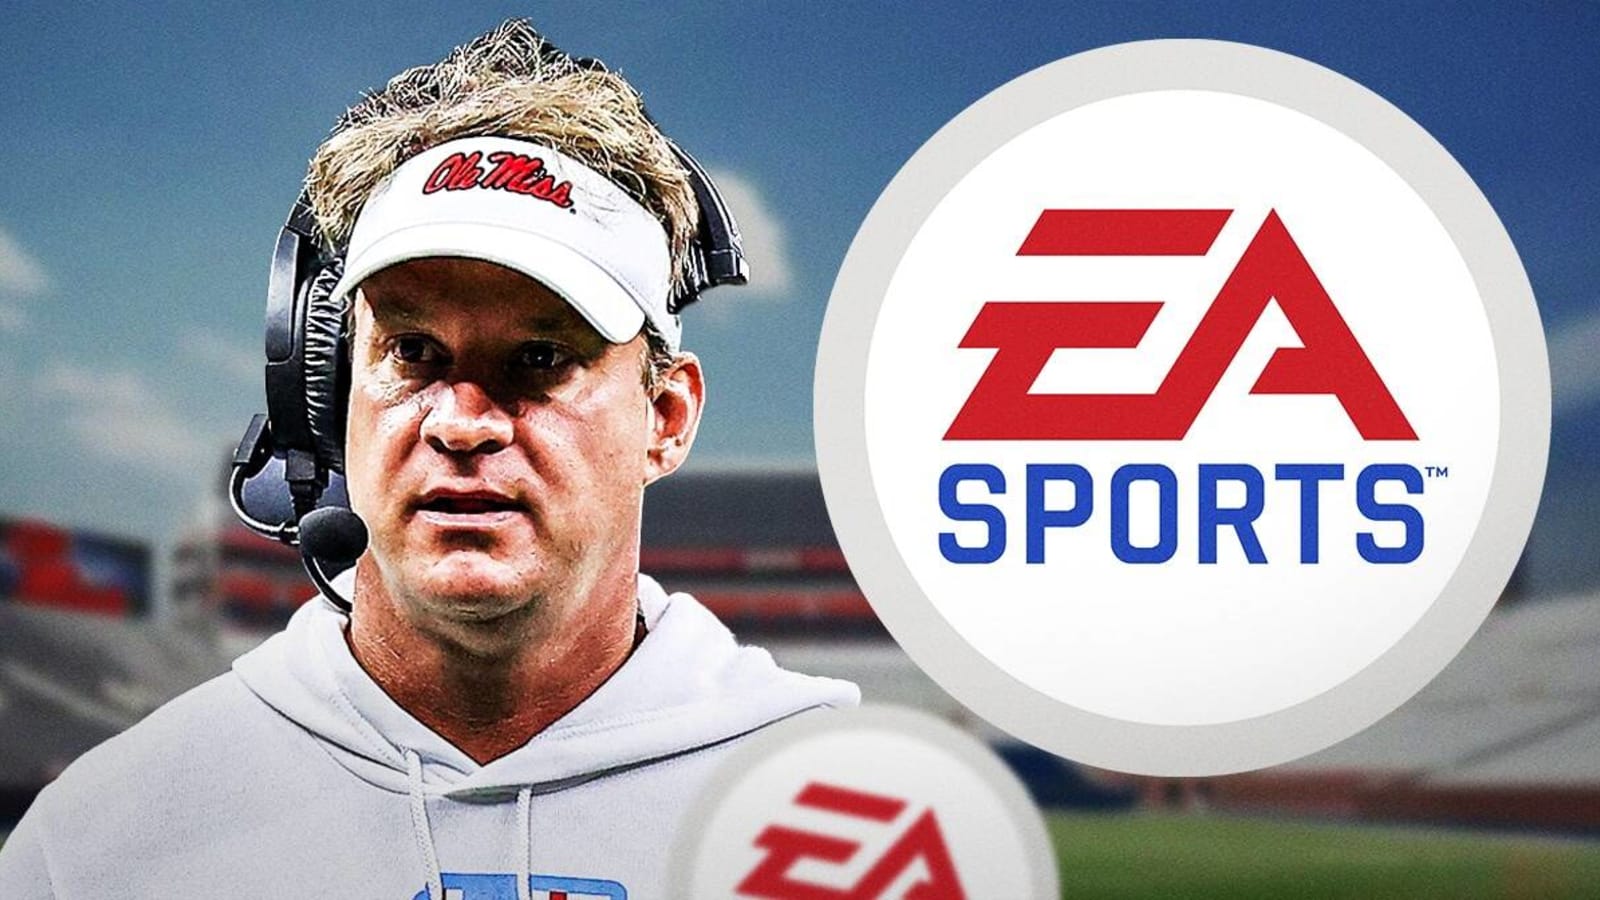 Ole Miss football’s Lane Kiffin makes intriguing EA Sports College Football 25 offer